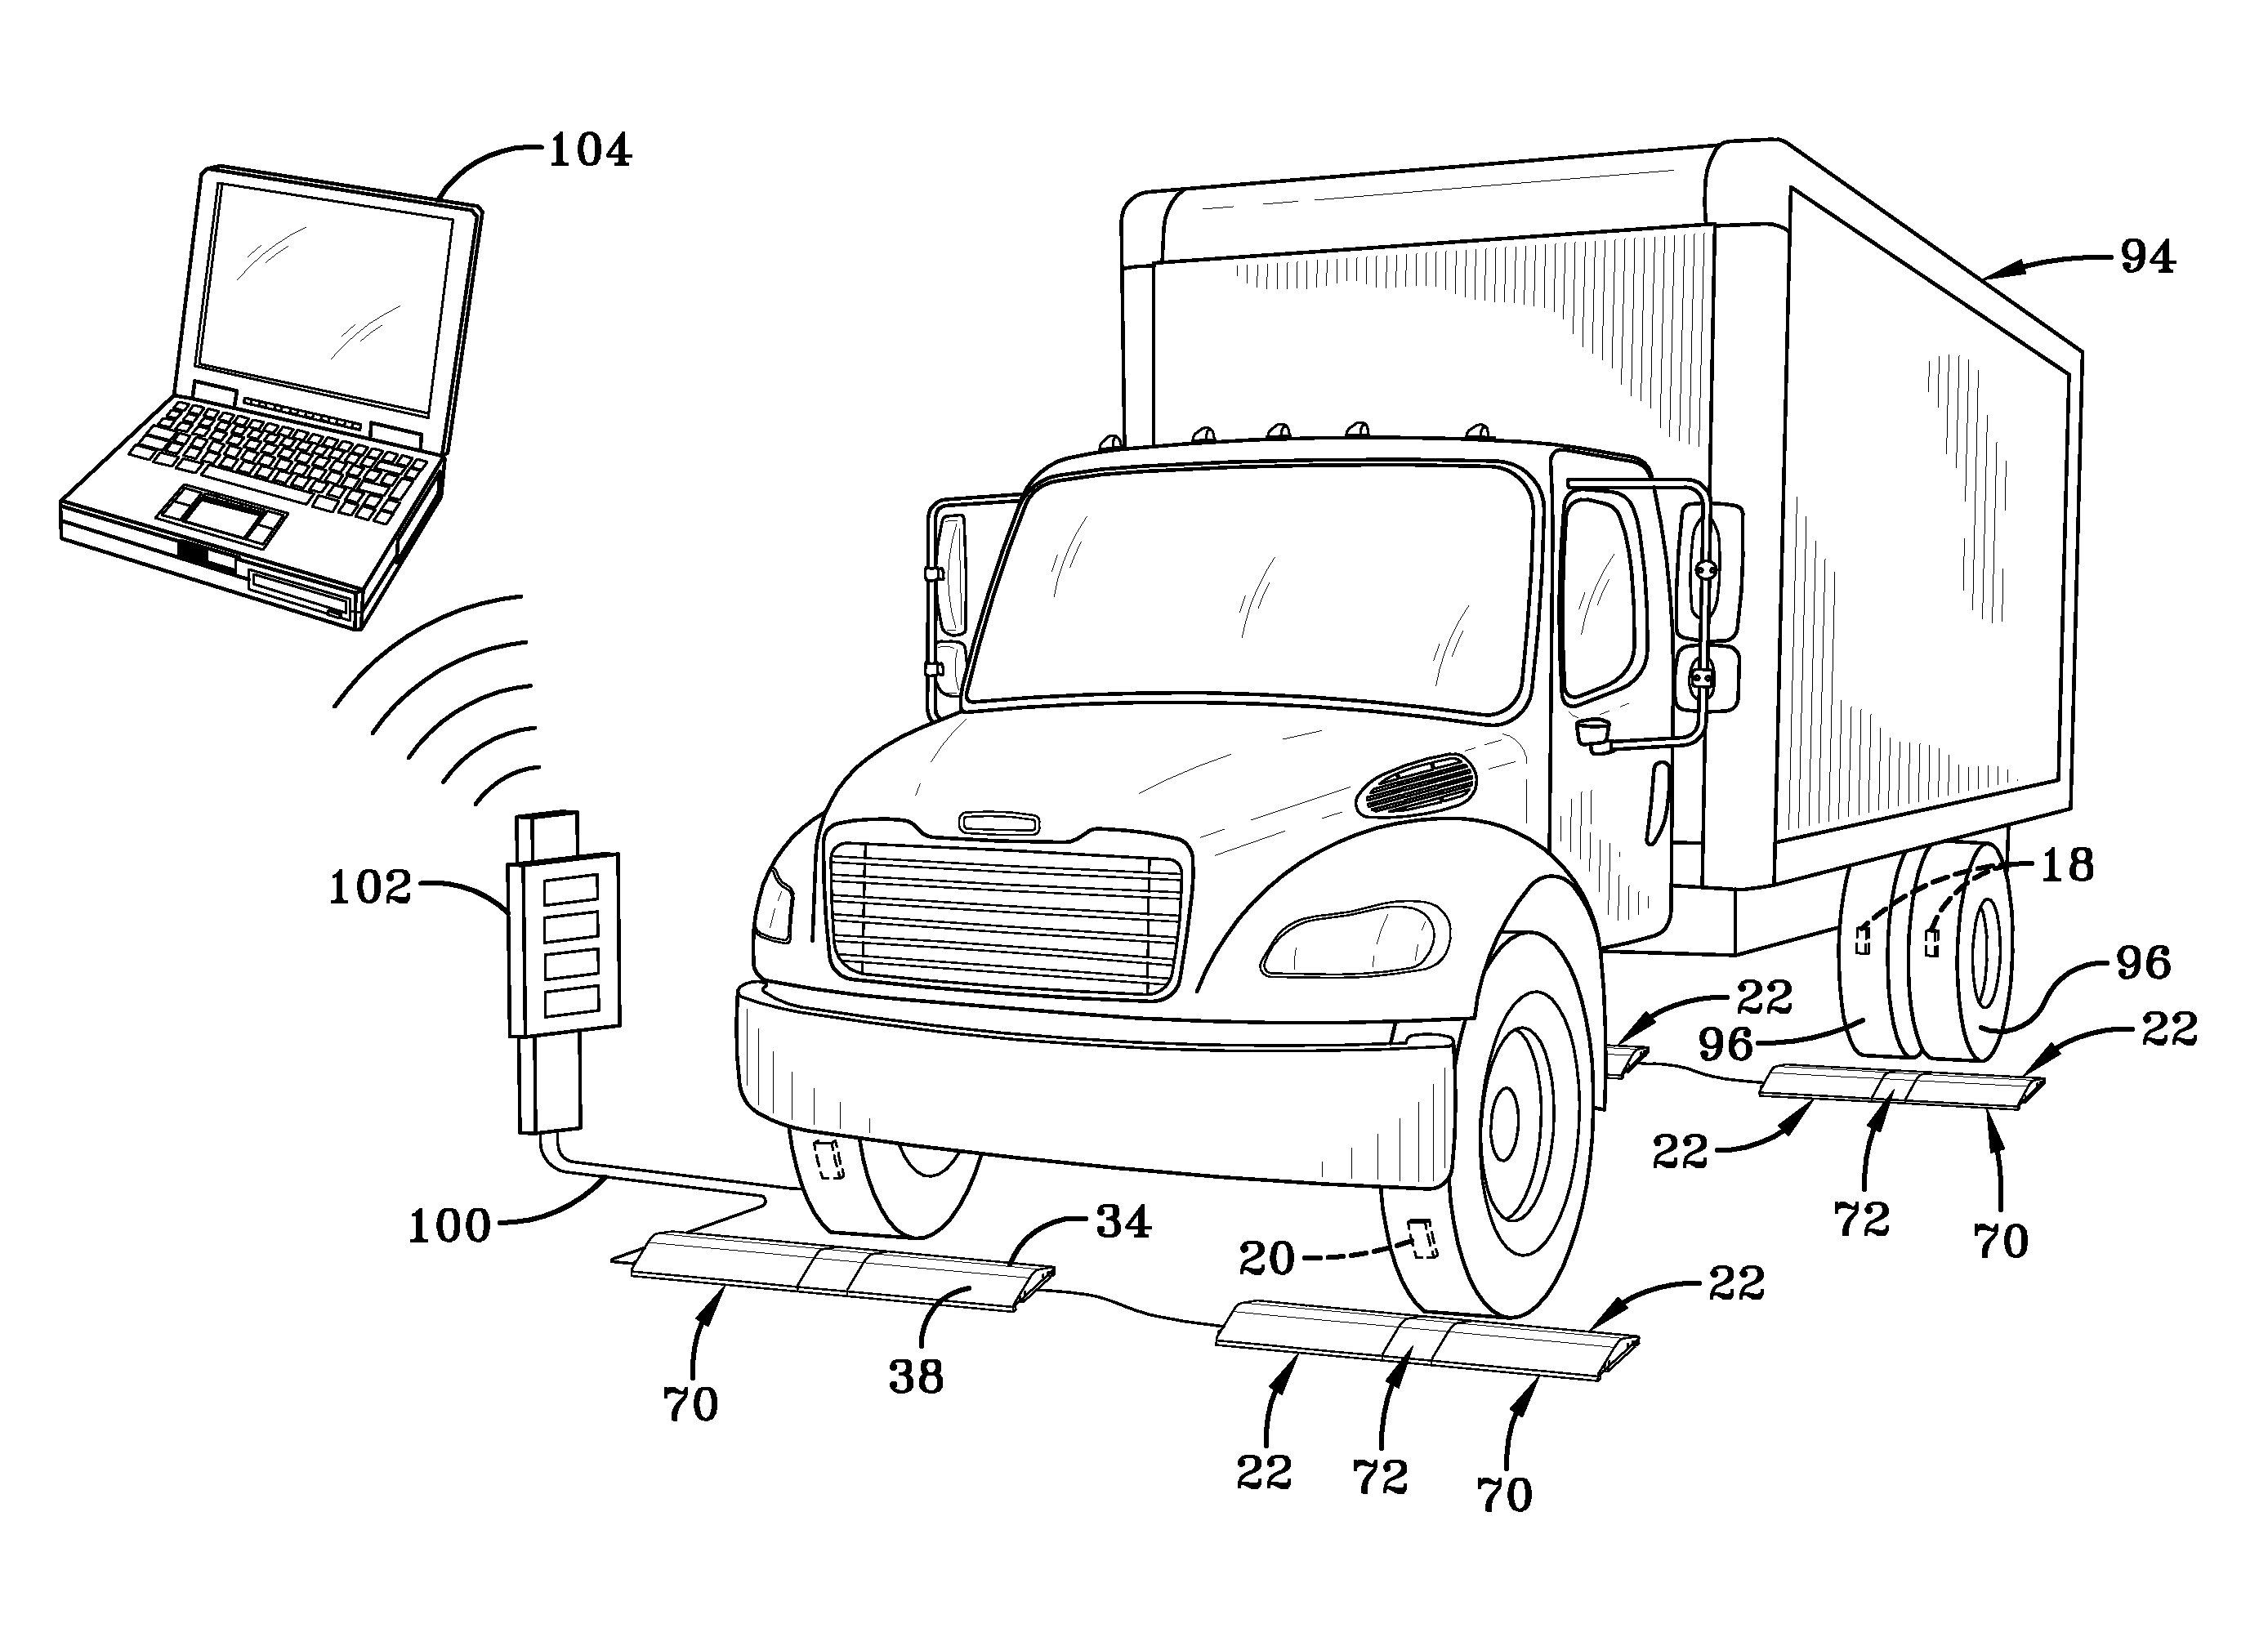 Method for reading a vehicle tag within a read station